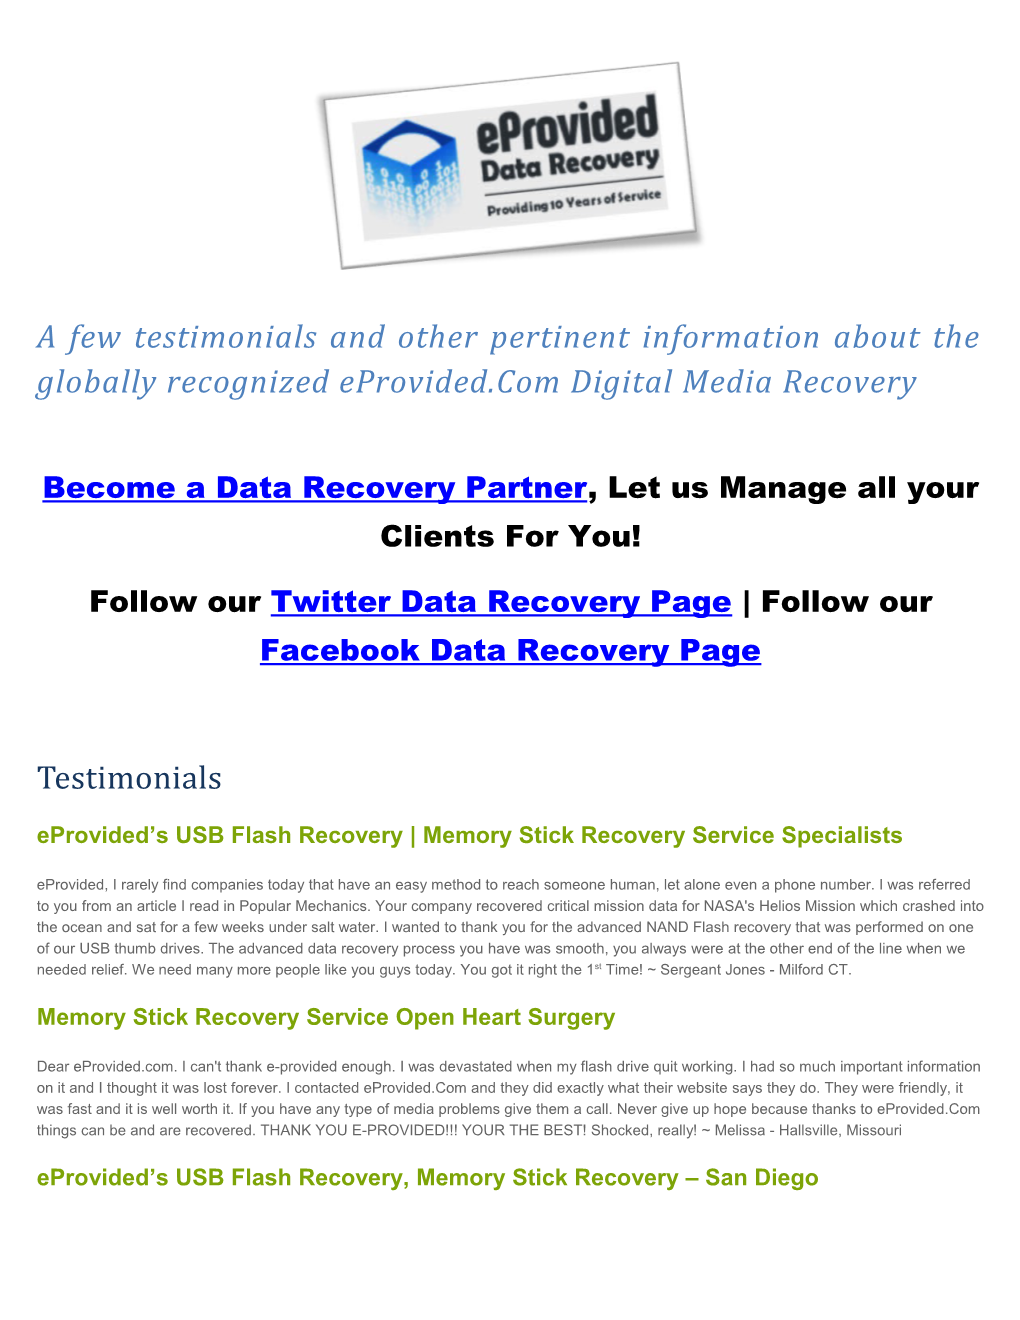 Eprovided's USB Flash Recovery, Memory Stick Recovery Service